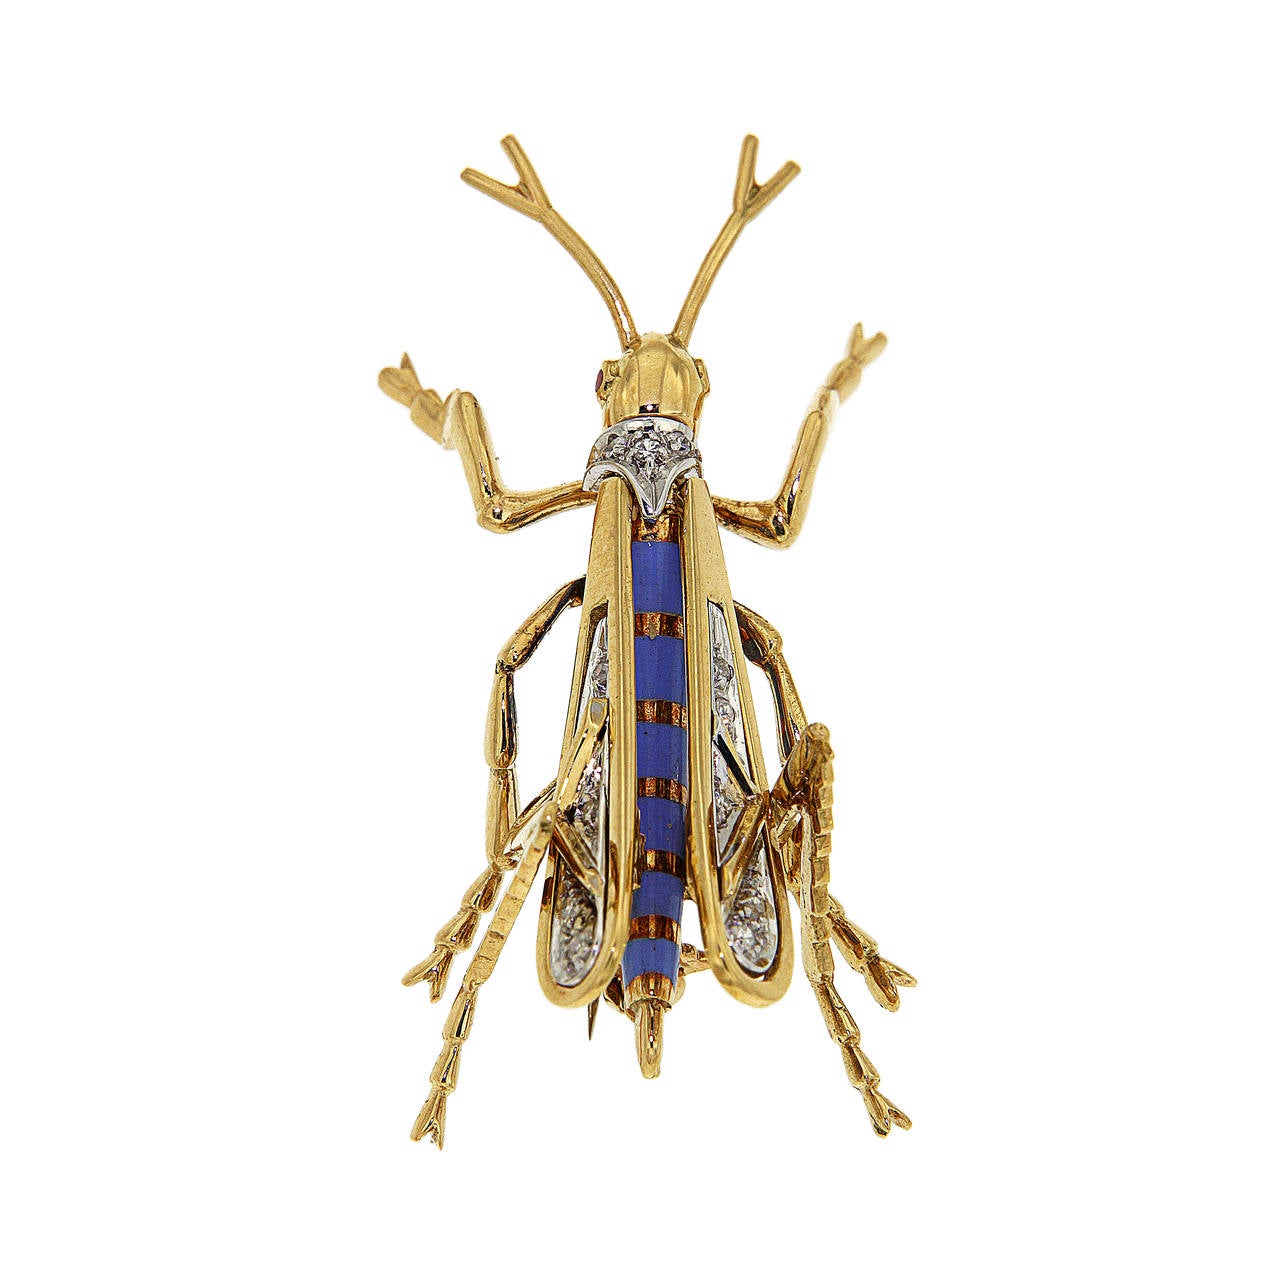 Graceful Grasshopper Brooch in Enamel and Yellow Gold 18k with 13 Diamonds Total approximately 0.10 ctw.
Ready for delivery. It can be shipped with express delivery on